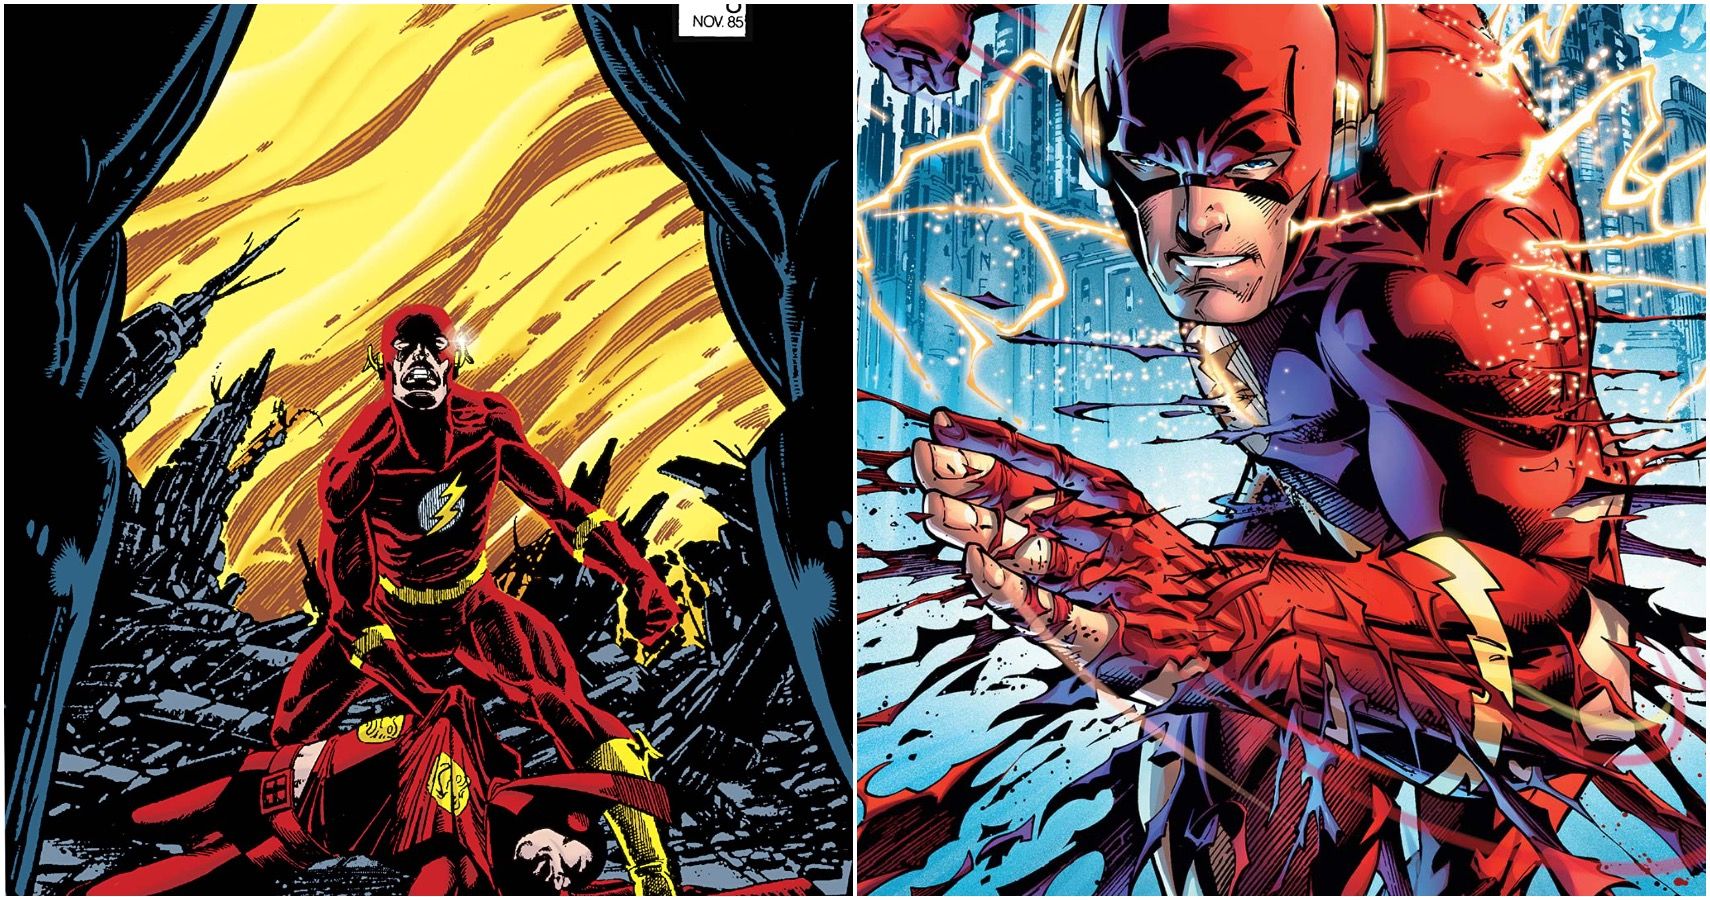 Crisis on infinte earths vs Flashpoint